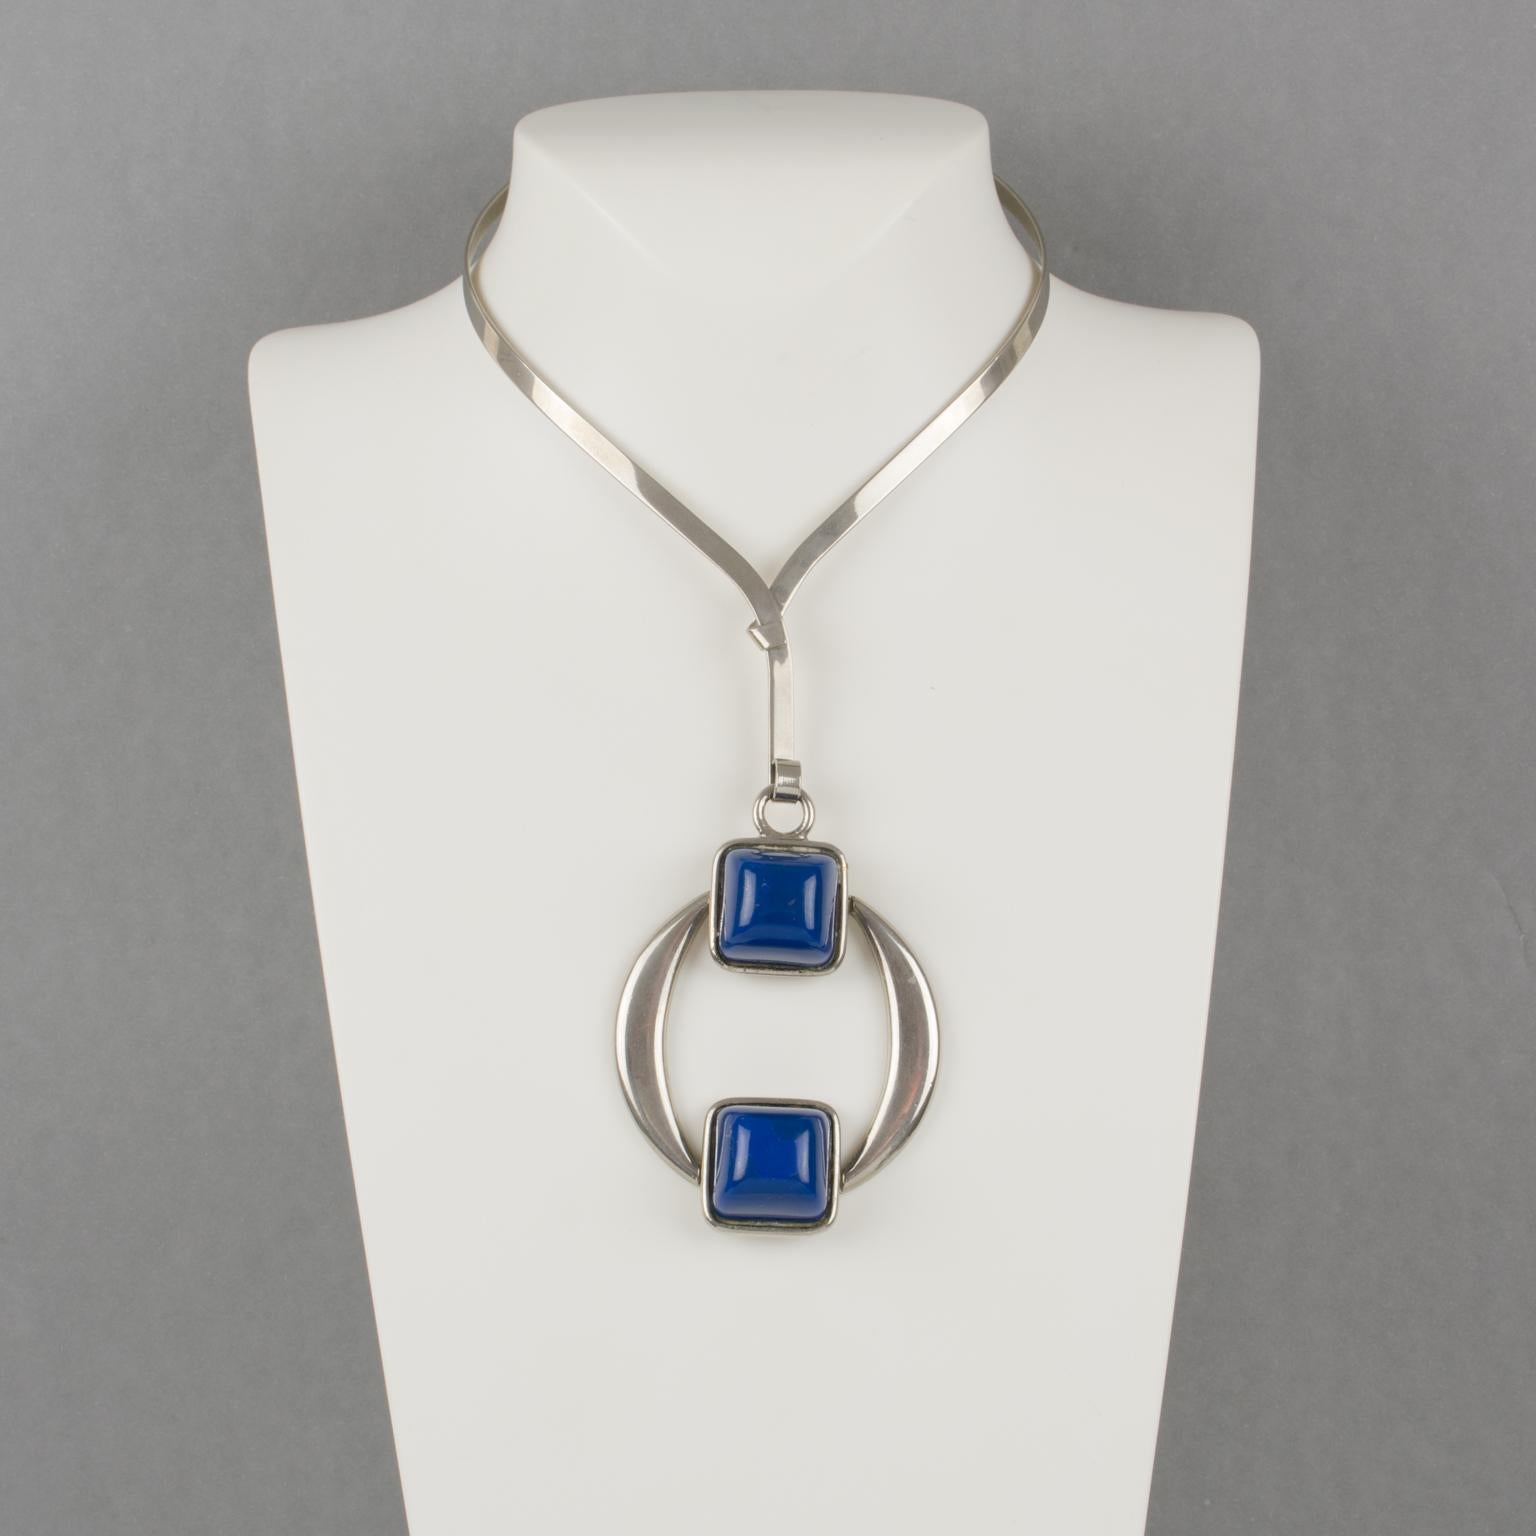 Modernist Mid Century Space Age Collar Pendant Necklace Stainless Steel and Blue Resin For Sale